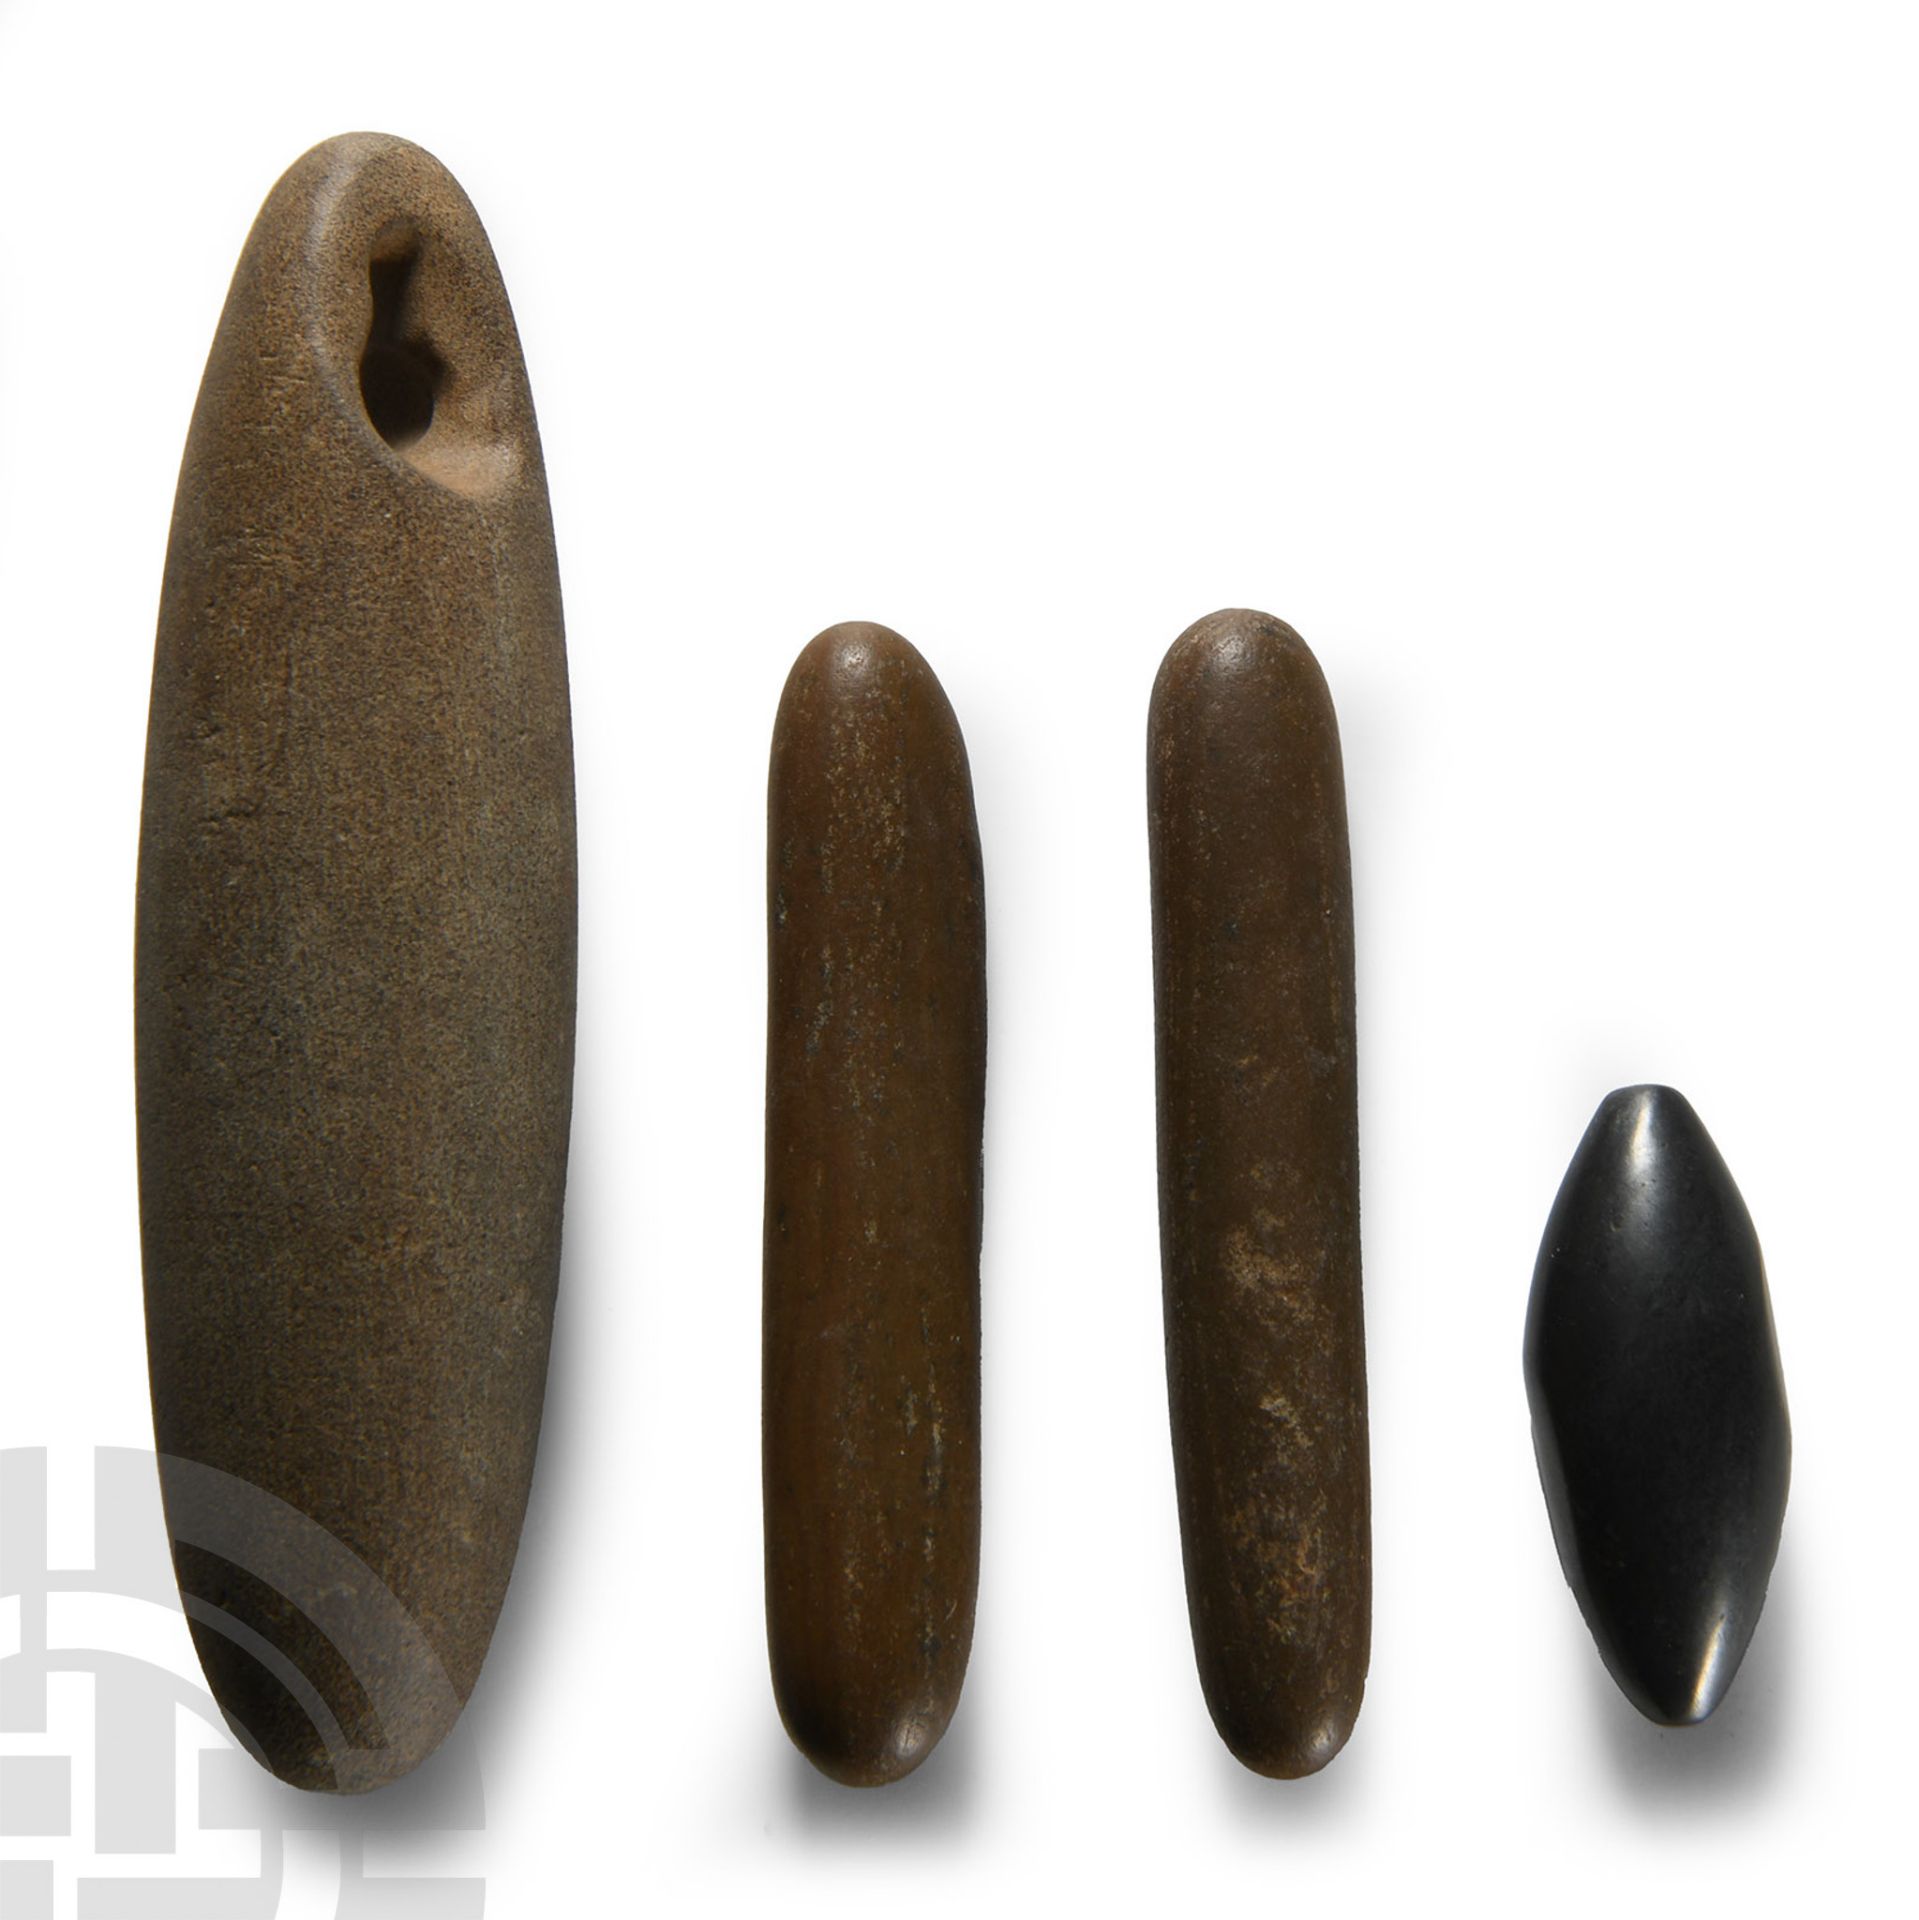 Western Asiatic Stone Weight Collection